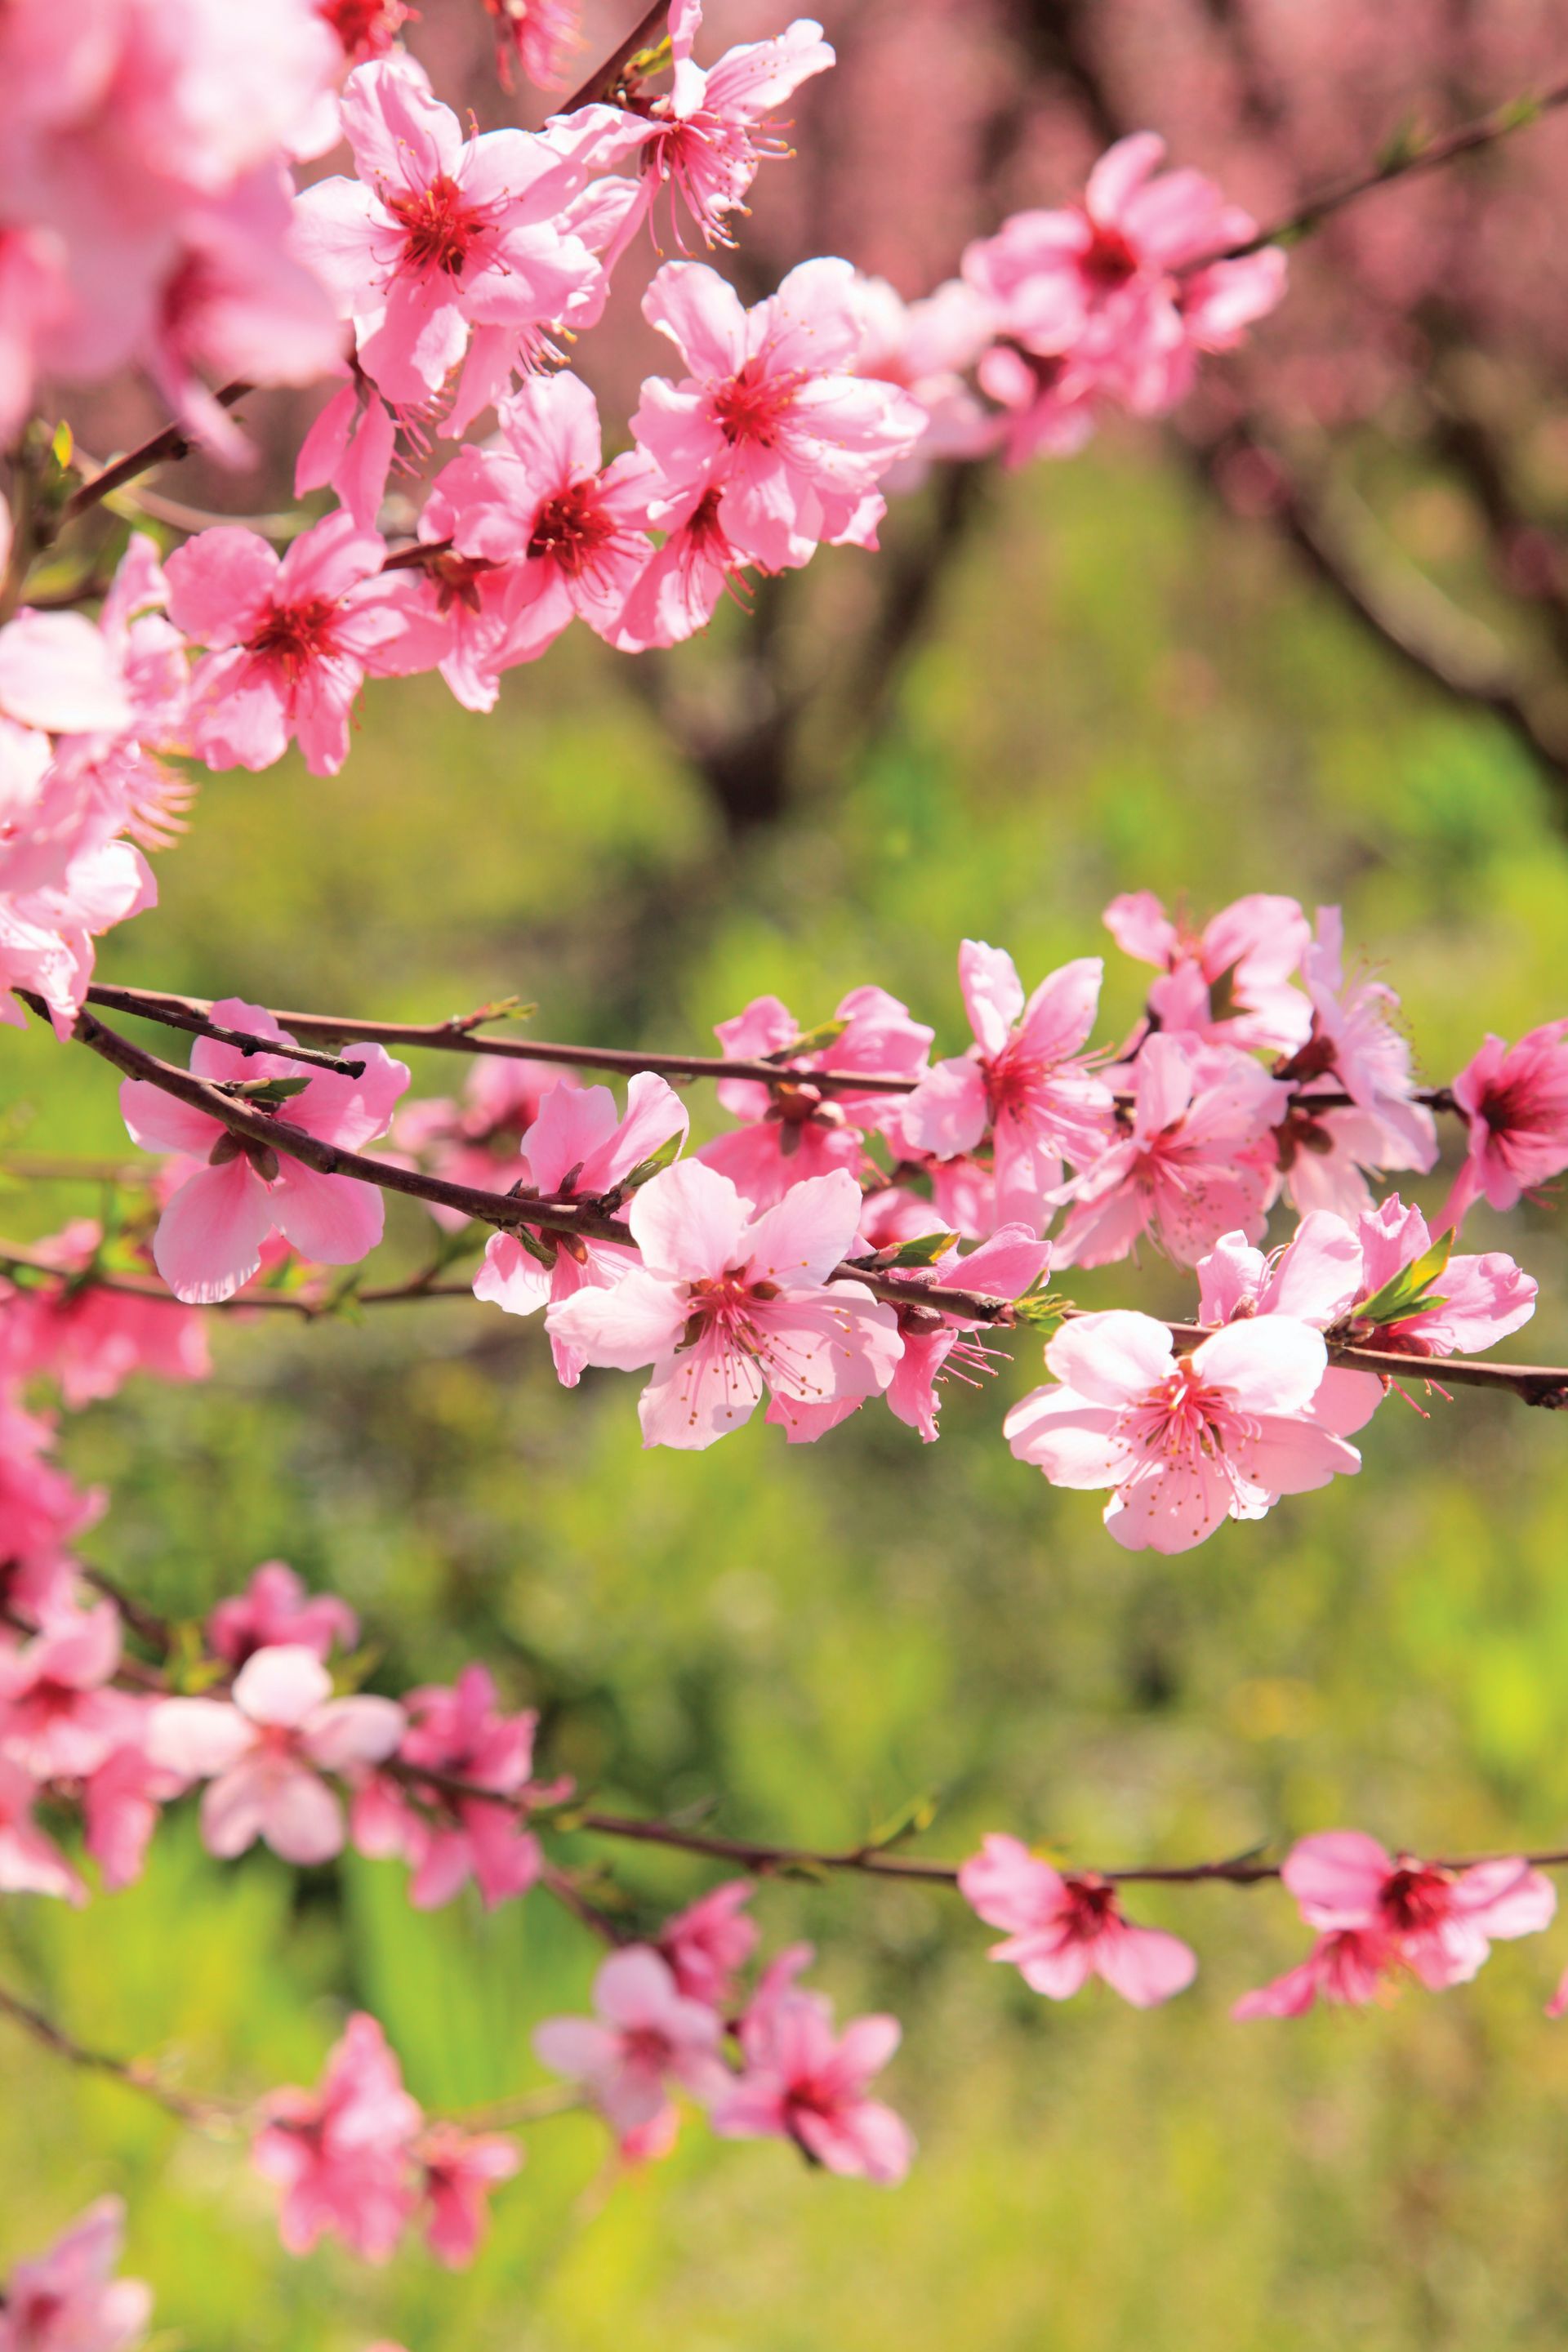 A few tree branches covered in pink blossoms.